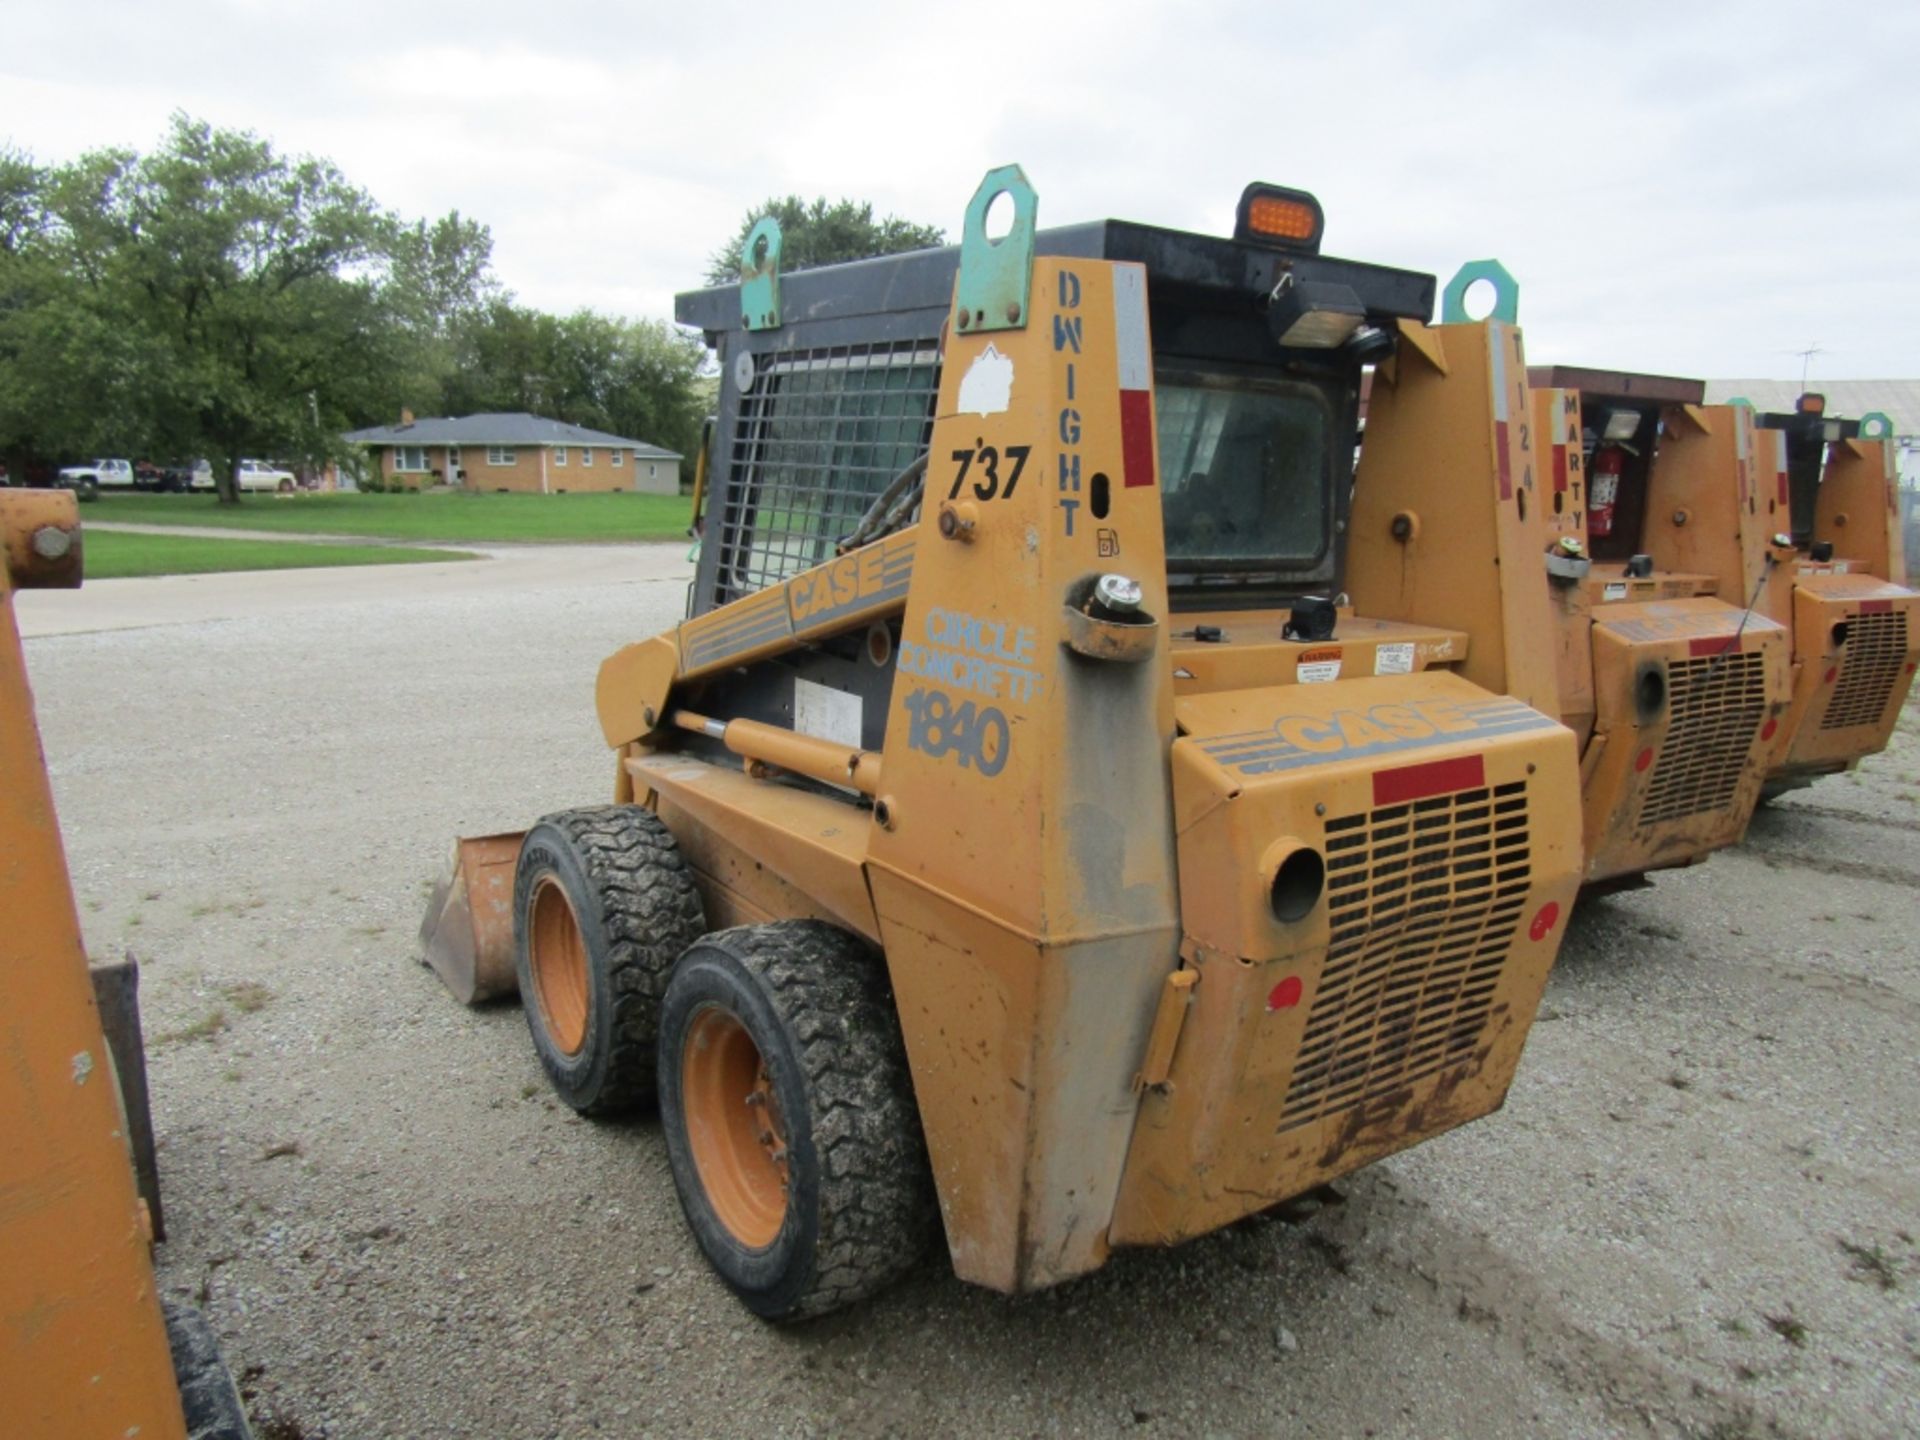 1999 Case 1840 Uni-loader with Bucket, 3517 Hours, ID #JAF0285737, - Image 4 of 12